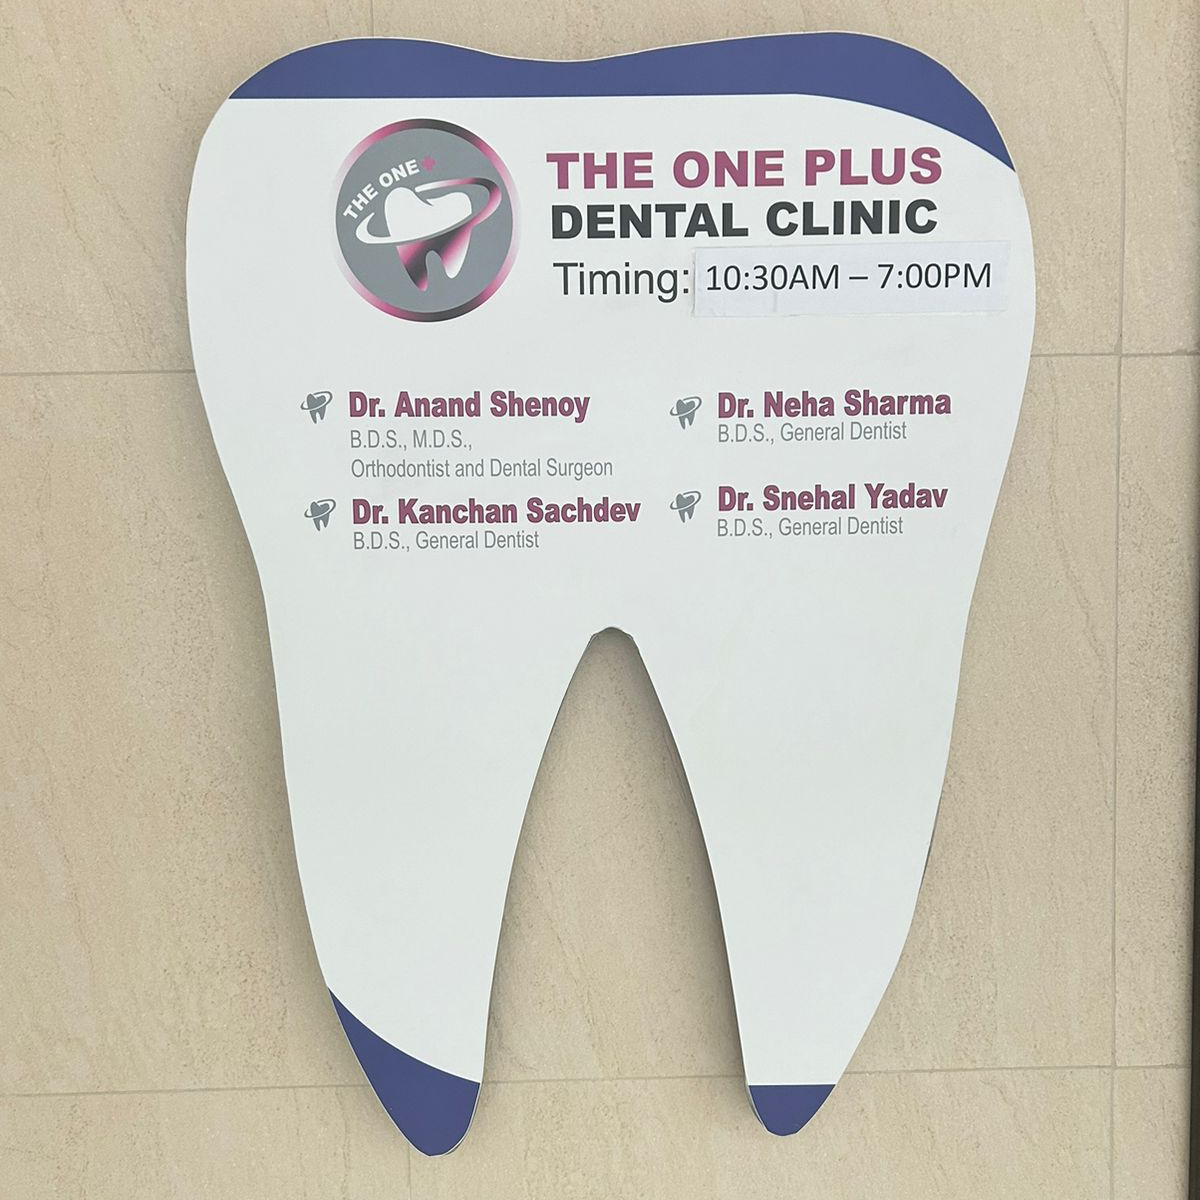 The One Plus Dental Clinic